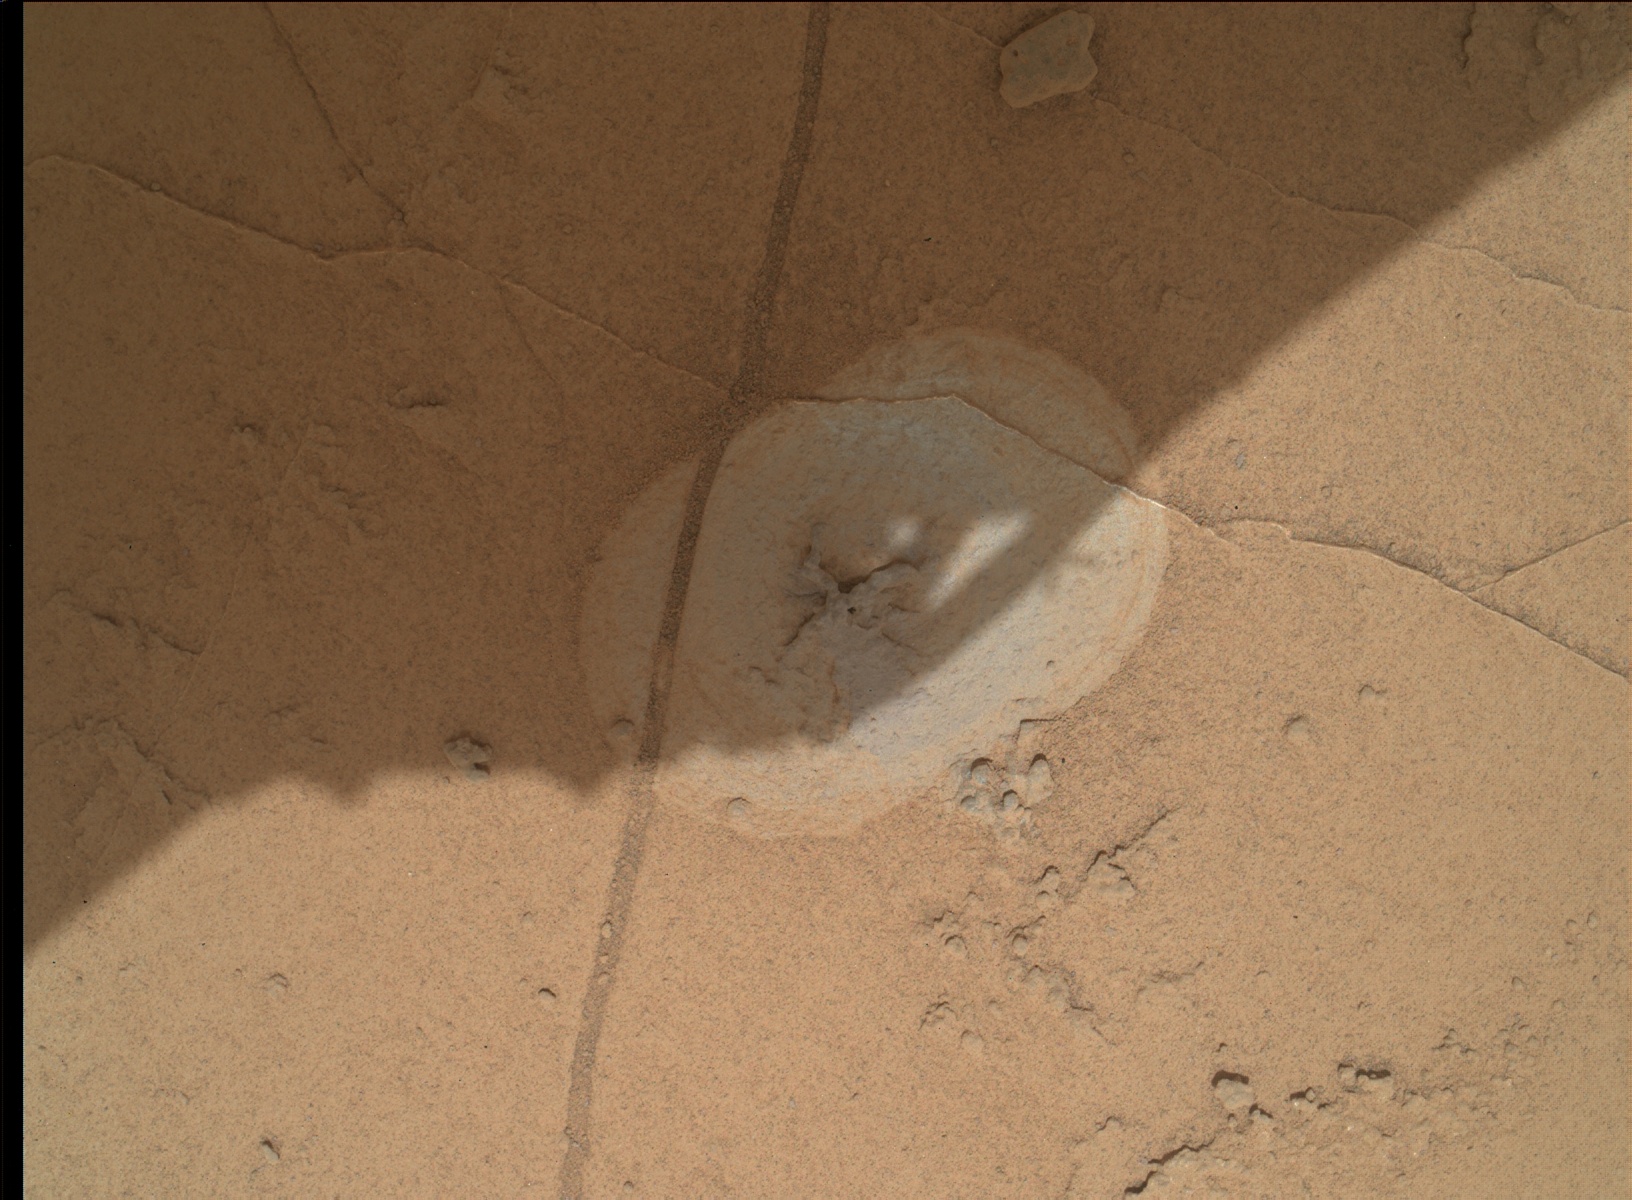 Nasa's Mars rover Curiosity acquired this image using its Mars Hand Lens Imager (MAHLI) on Sol 767